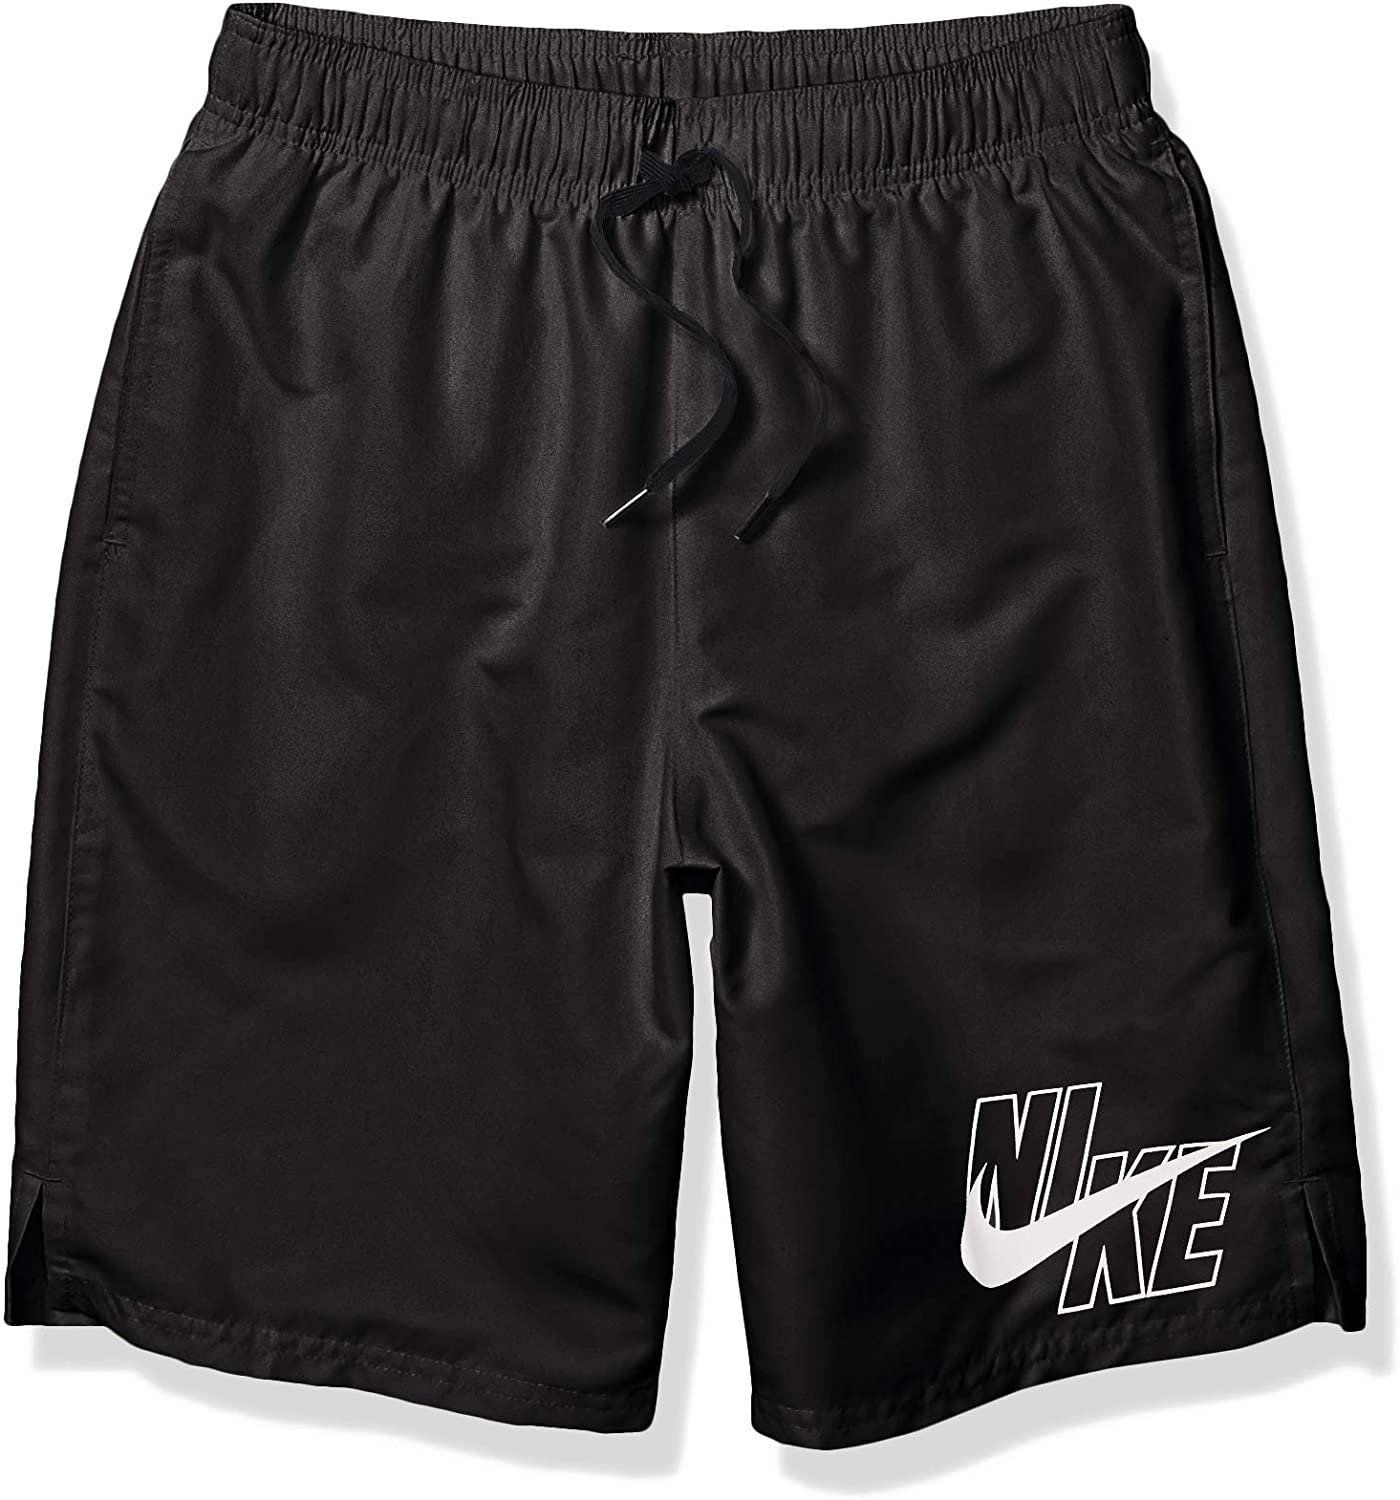 Men's Nike Logo Solid Lap 9" Volley Short Swim Trunk in Black color from the front